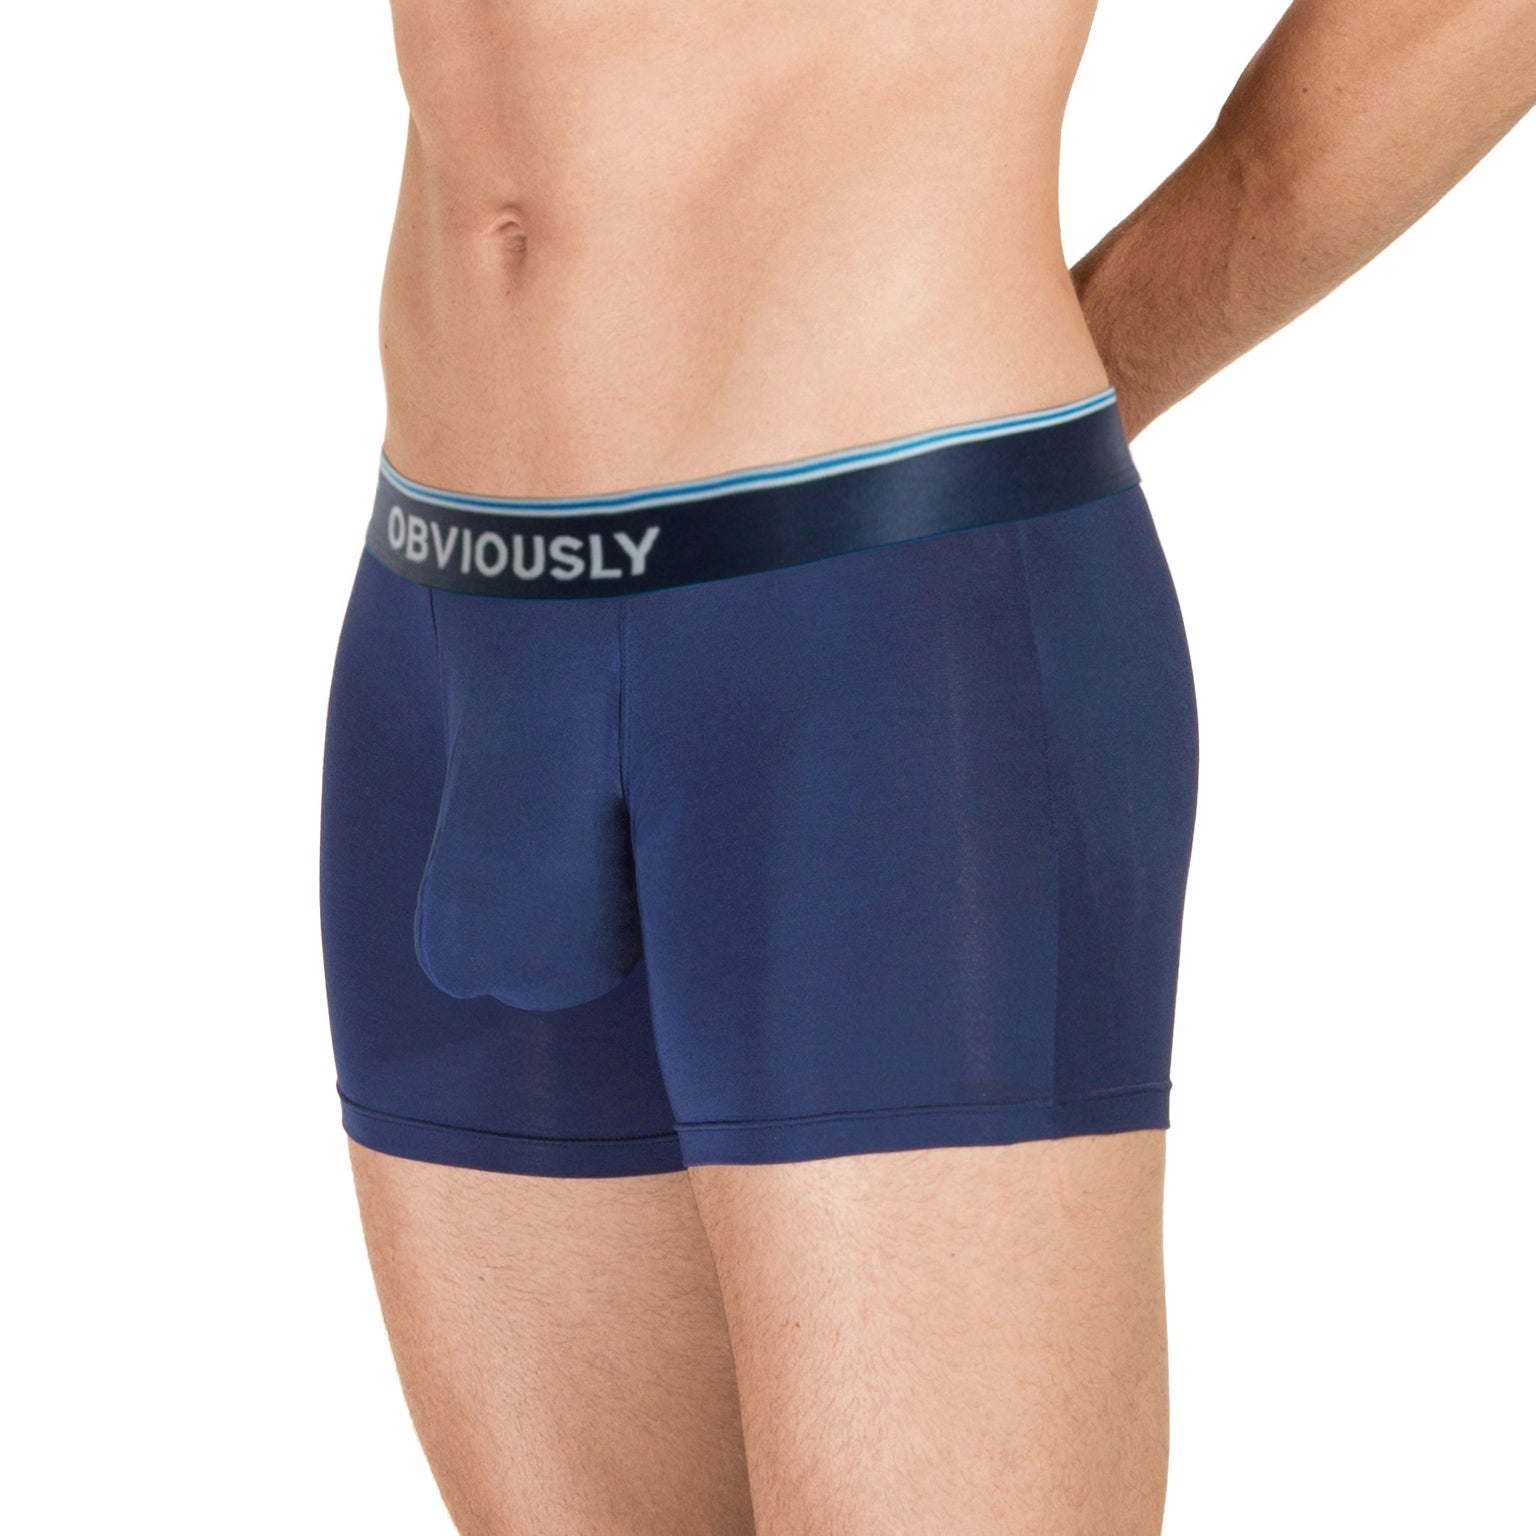 This company will mail you eco-friendly men's undies every three